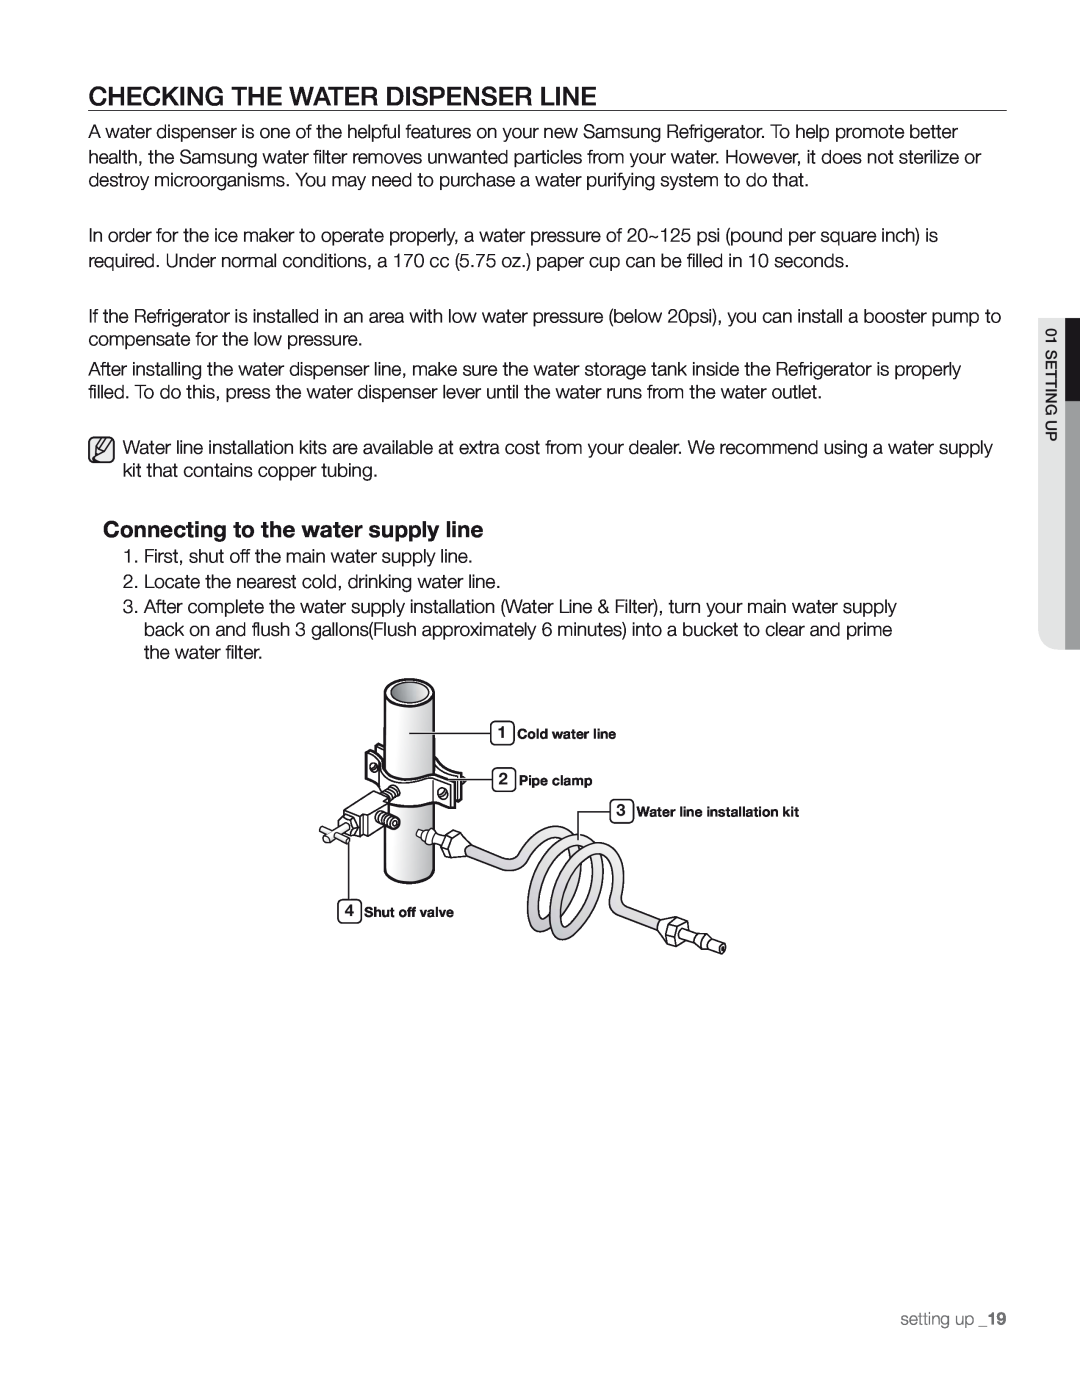 Samsung DA68-01890M user manual Checking The Water Dispenser Line, Connecting to the water supply line 